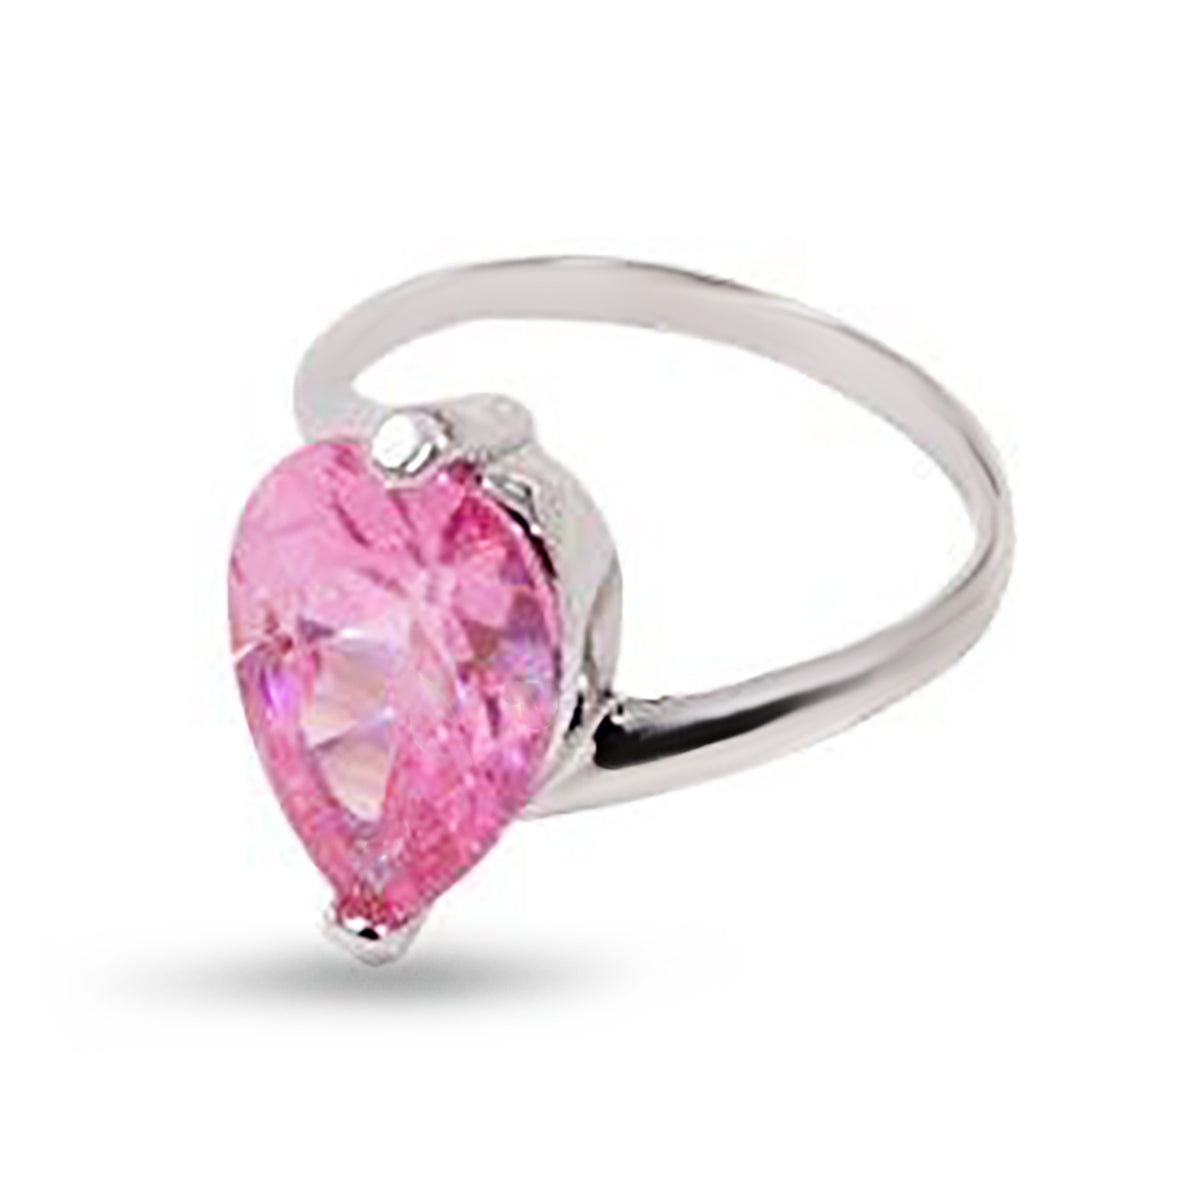 Large Sterling Silver Pink Pear Shape Solitaire Ring